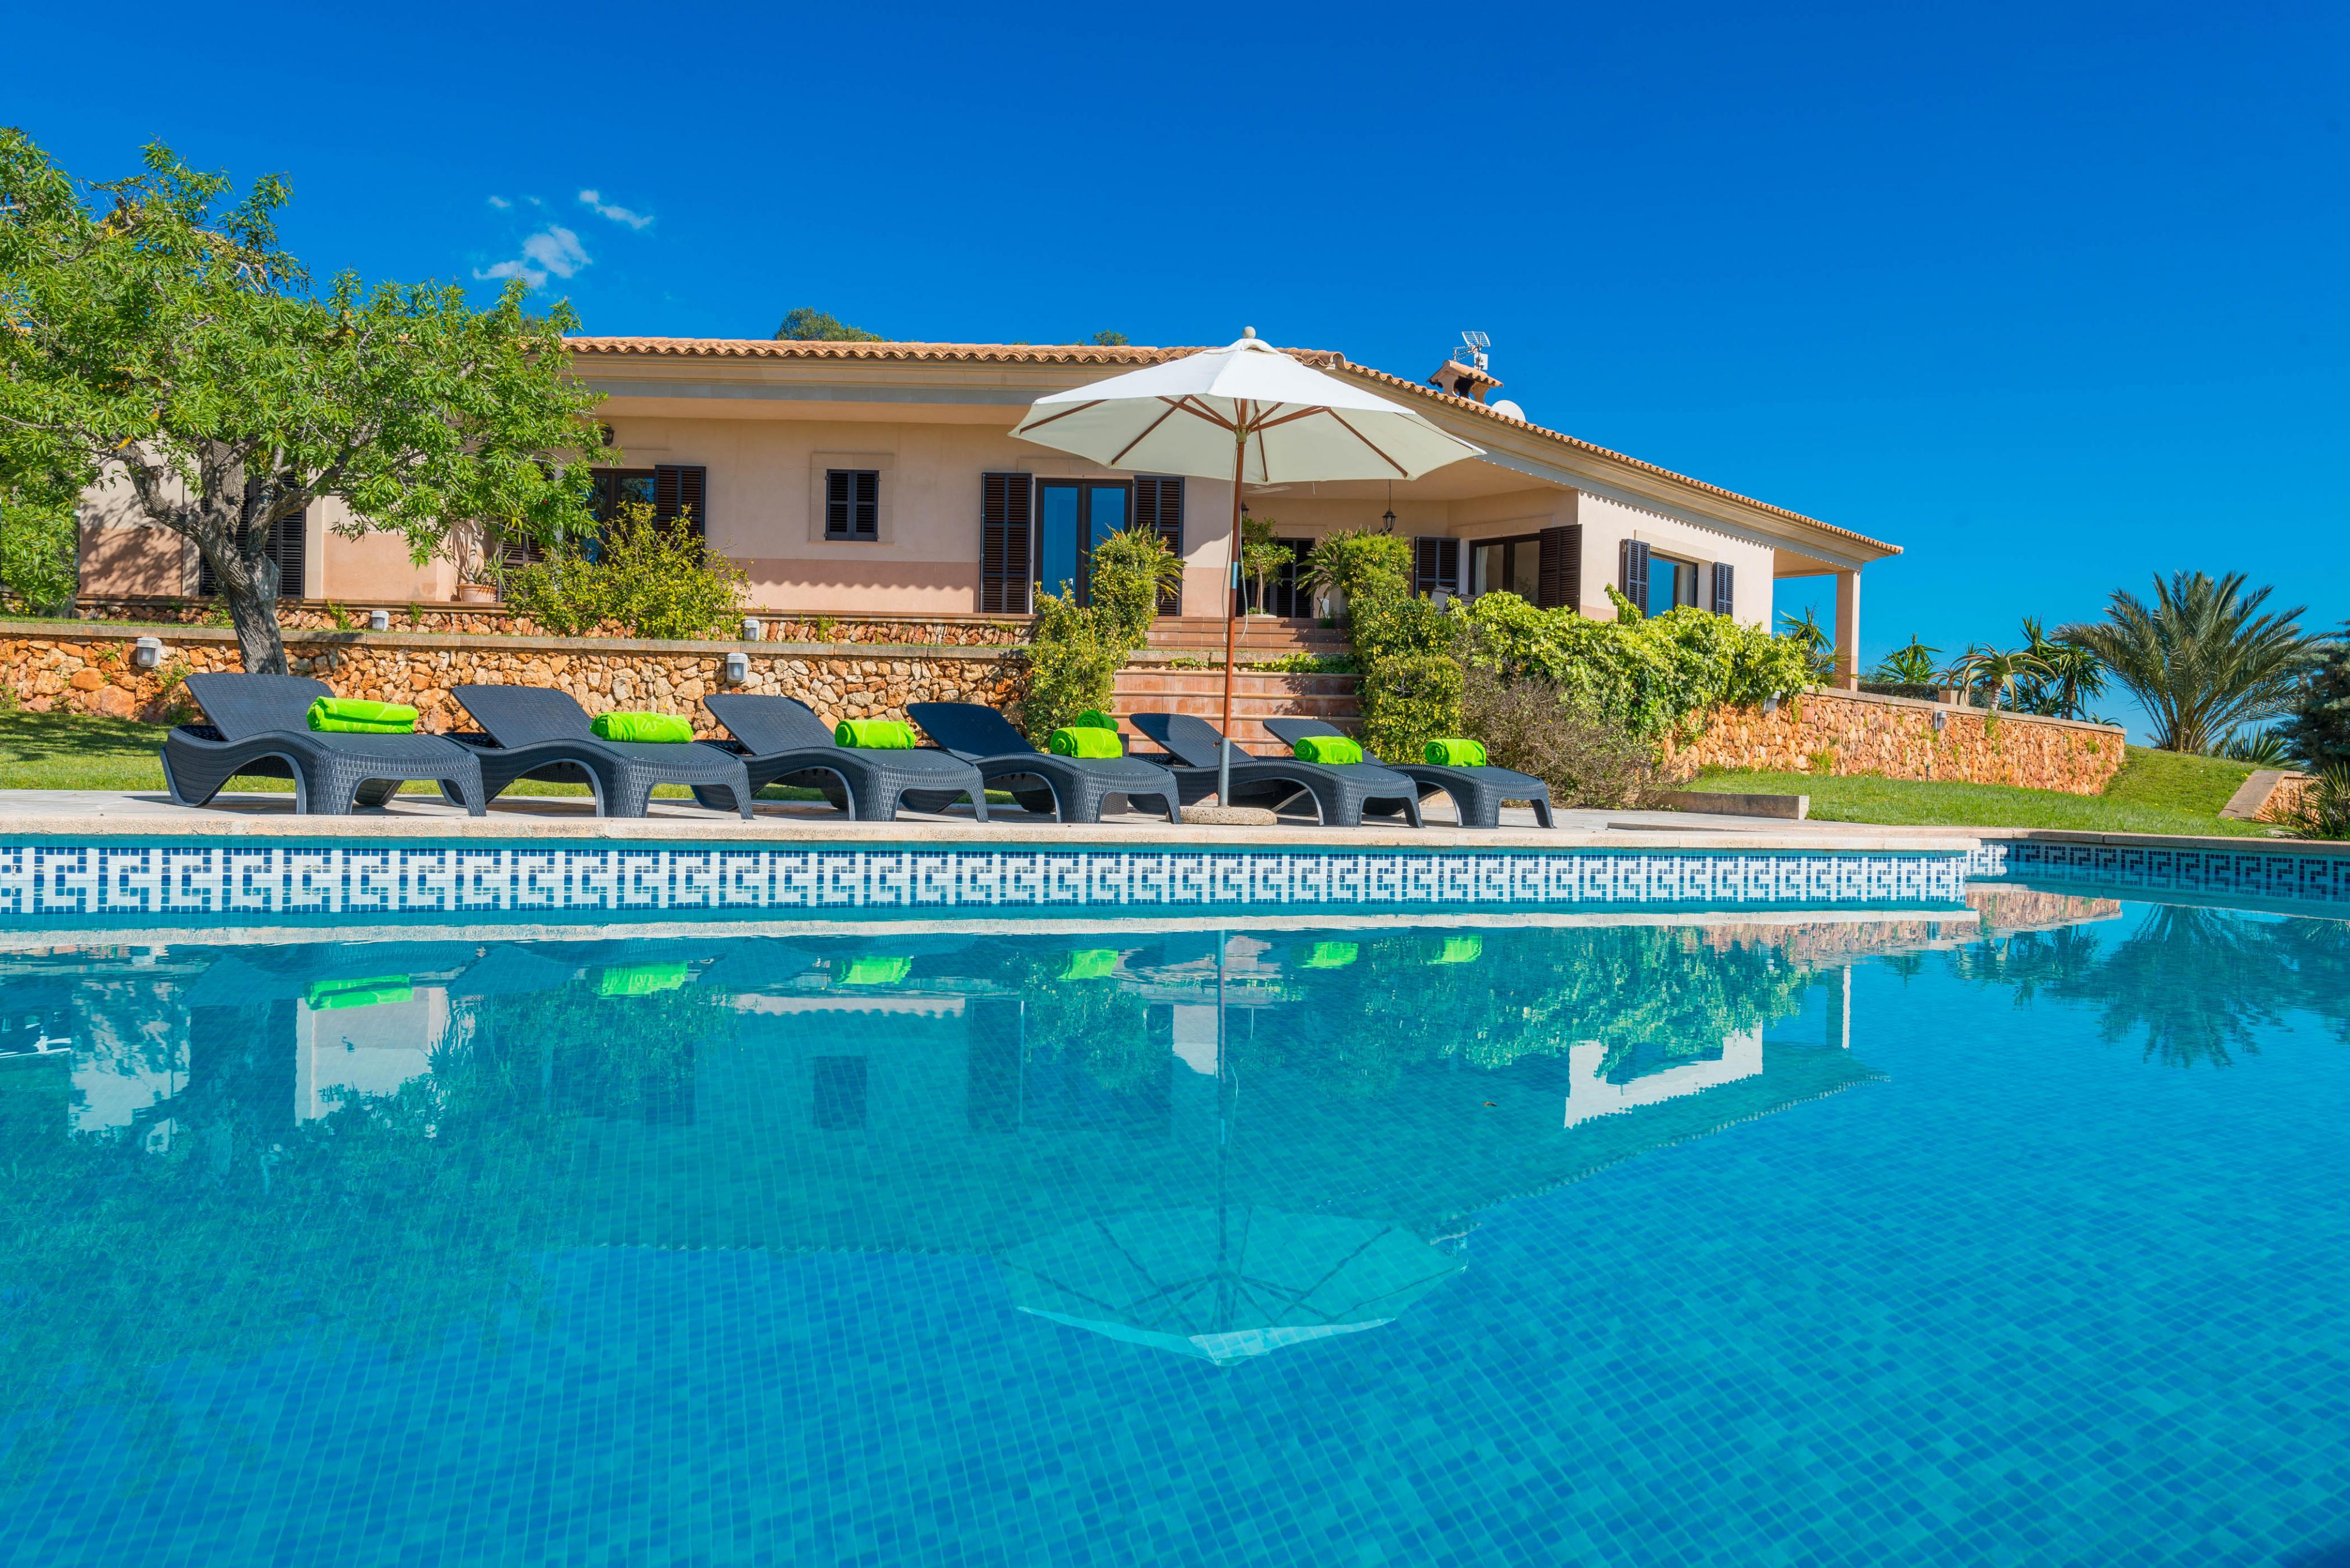 Property Image 2 - SA ROCA BLANCA - Amazing villa with private pool and breathtaking views. Free WiFi